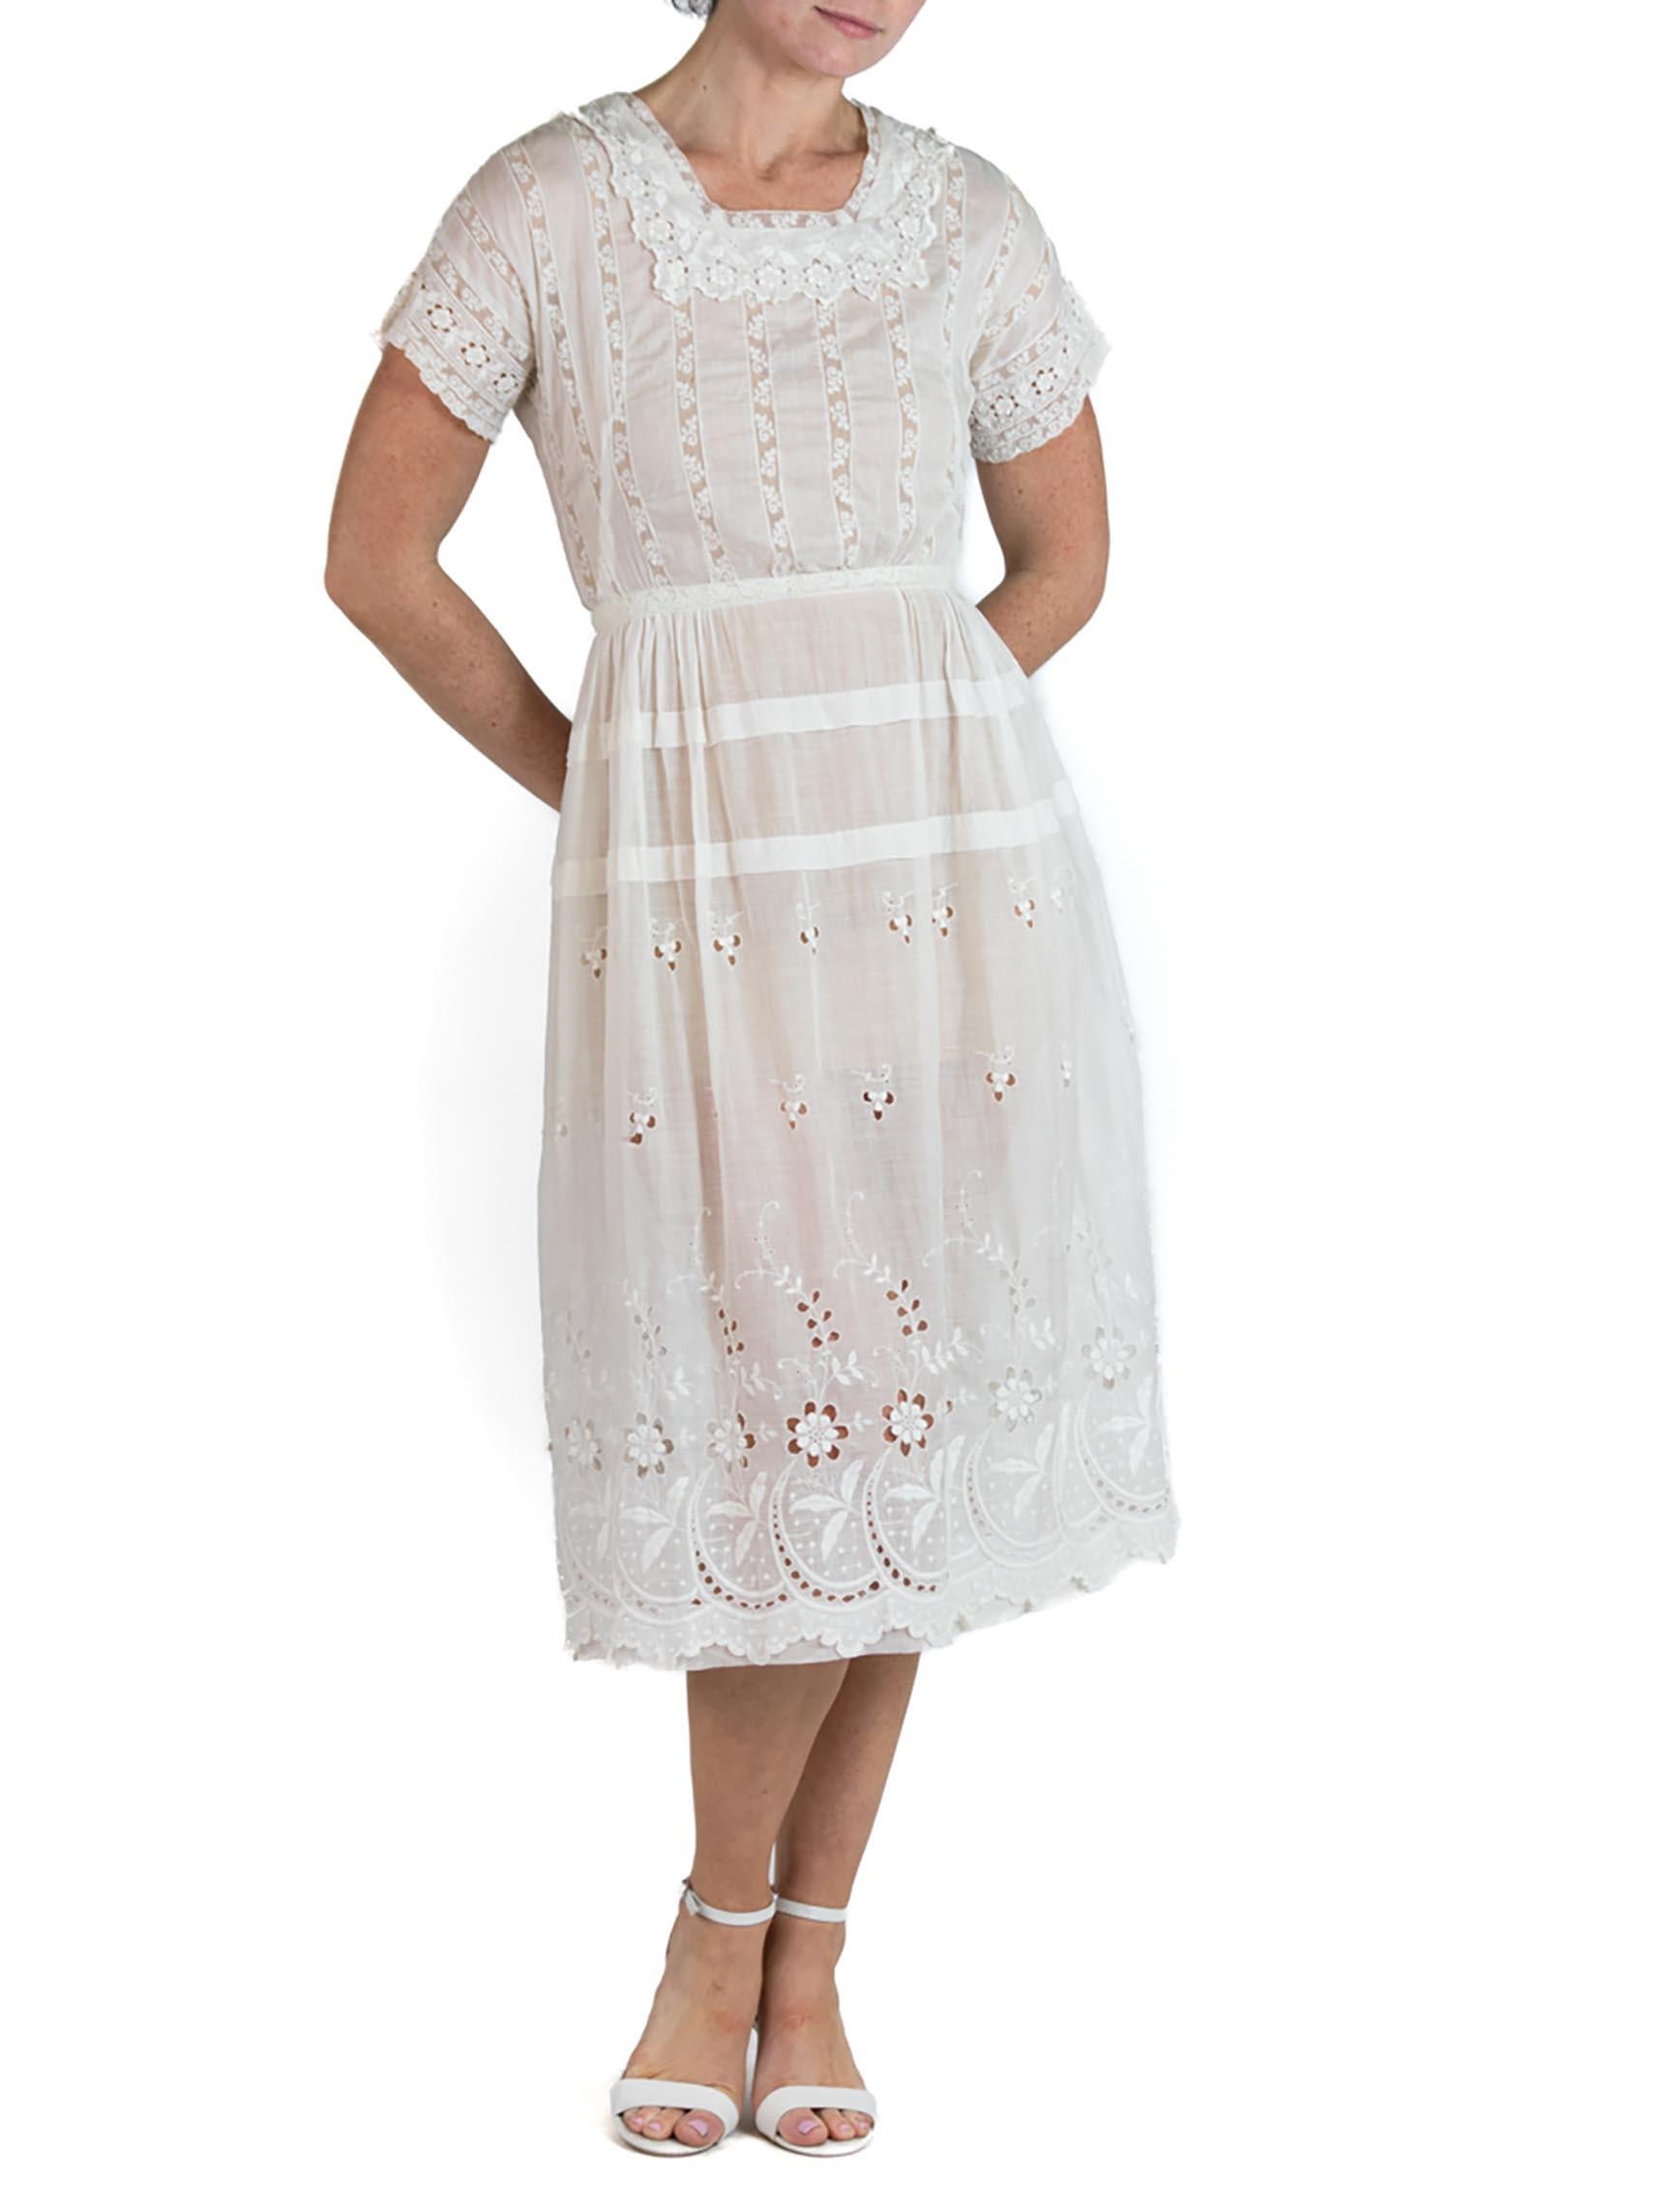 Edwardian White Organic Cotton Lawn Embroidered Lace Summer Tea Dress For Sale 2